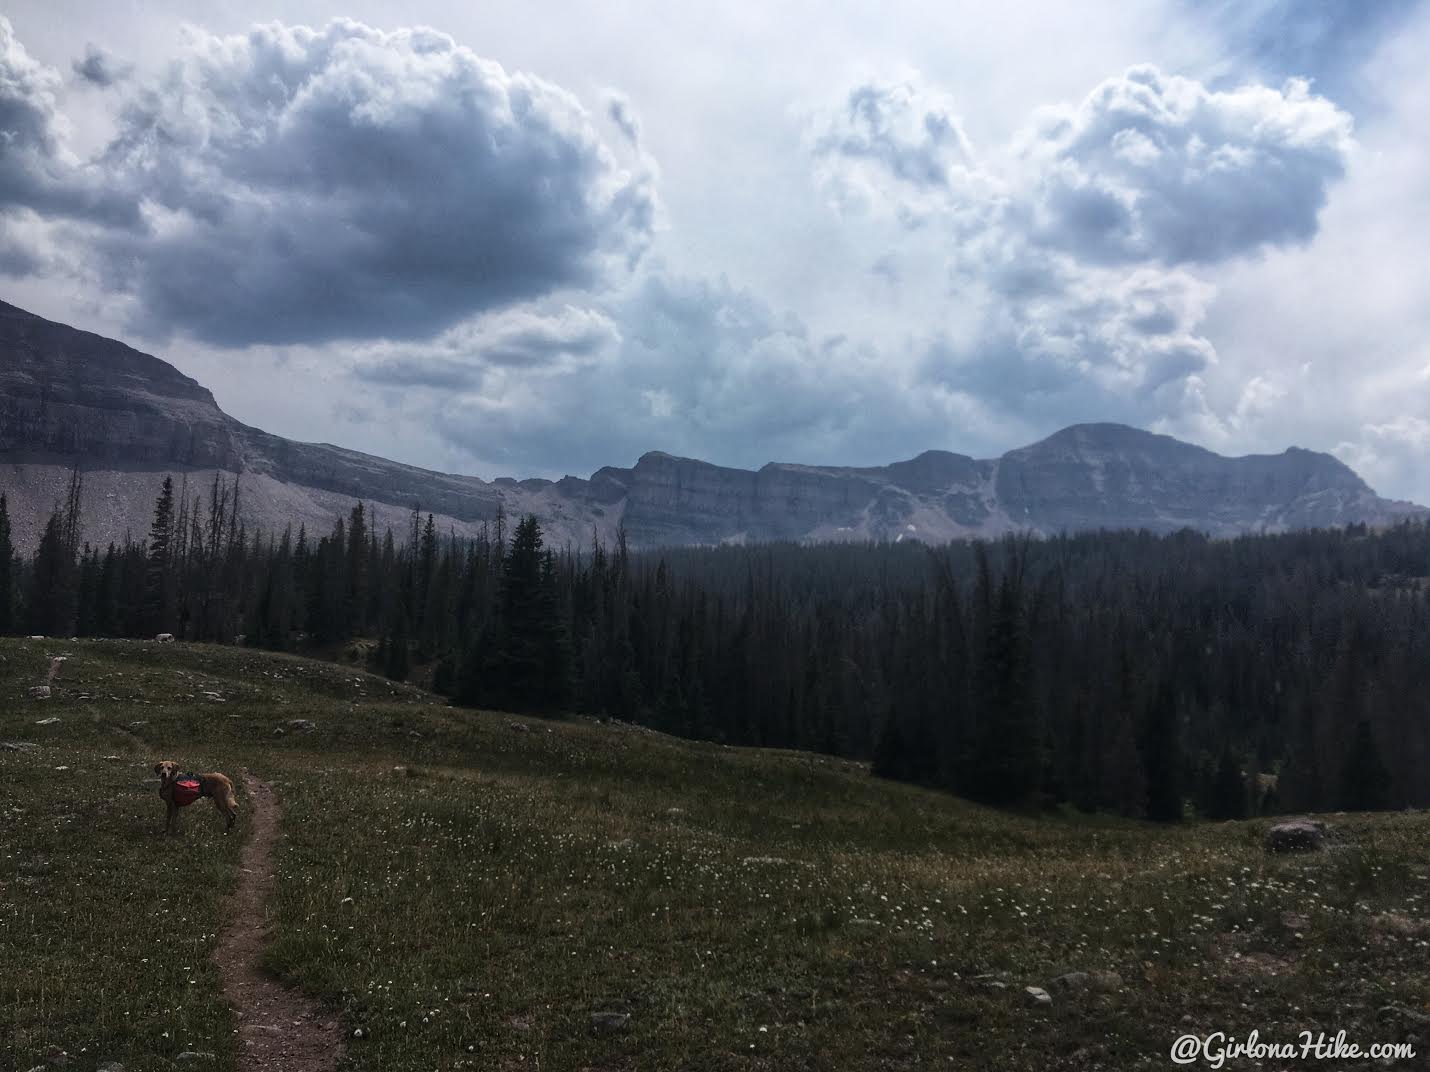 Backpacking to Dead Horse Lake, Uintas